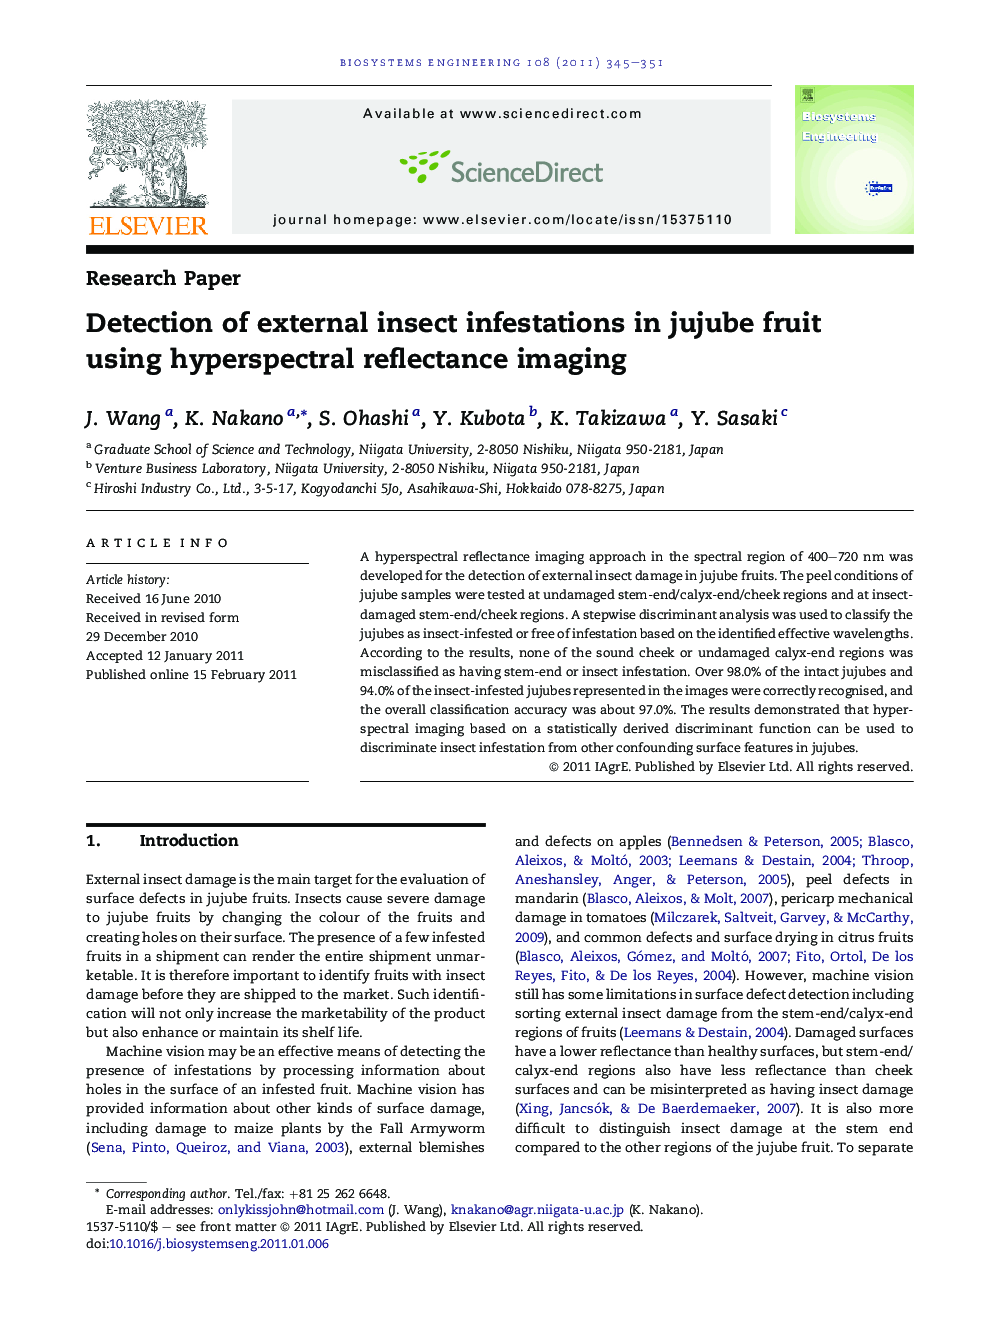 Detection of external insect infestations in jujube fruit using hyperspectral reflectance imaging